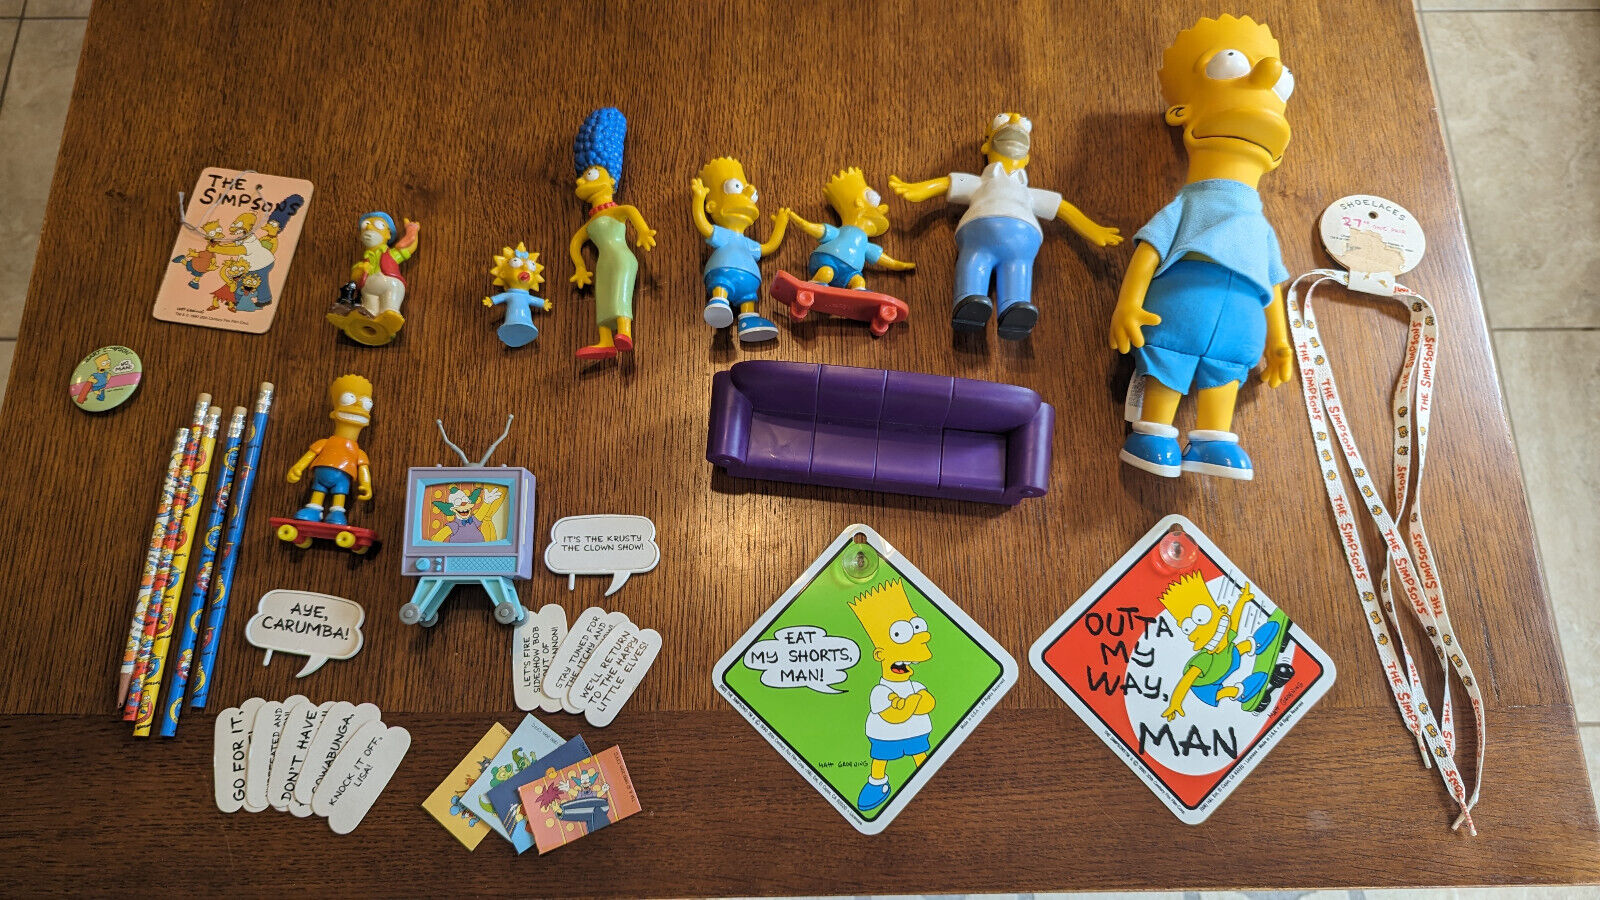 The Simpsons  Collectible  Merchandise. Cards, Figures, Posters, Magazine, etc